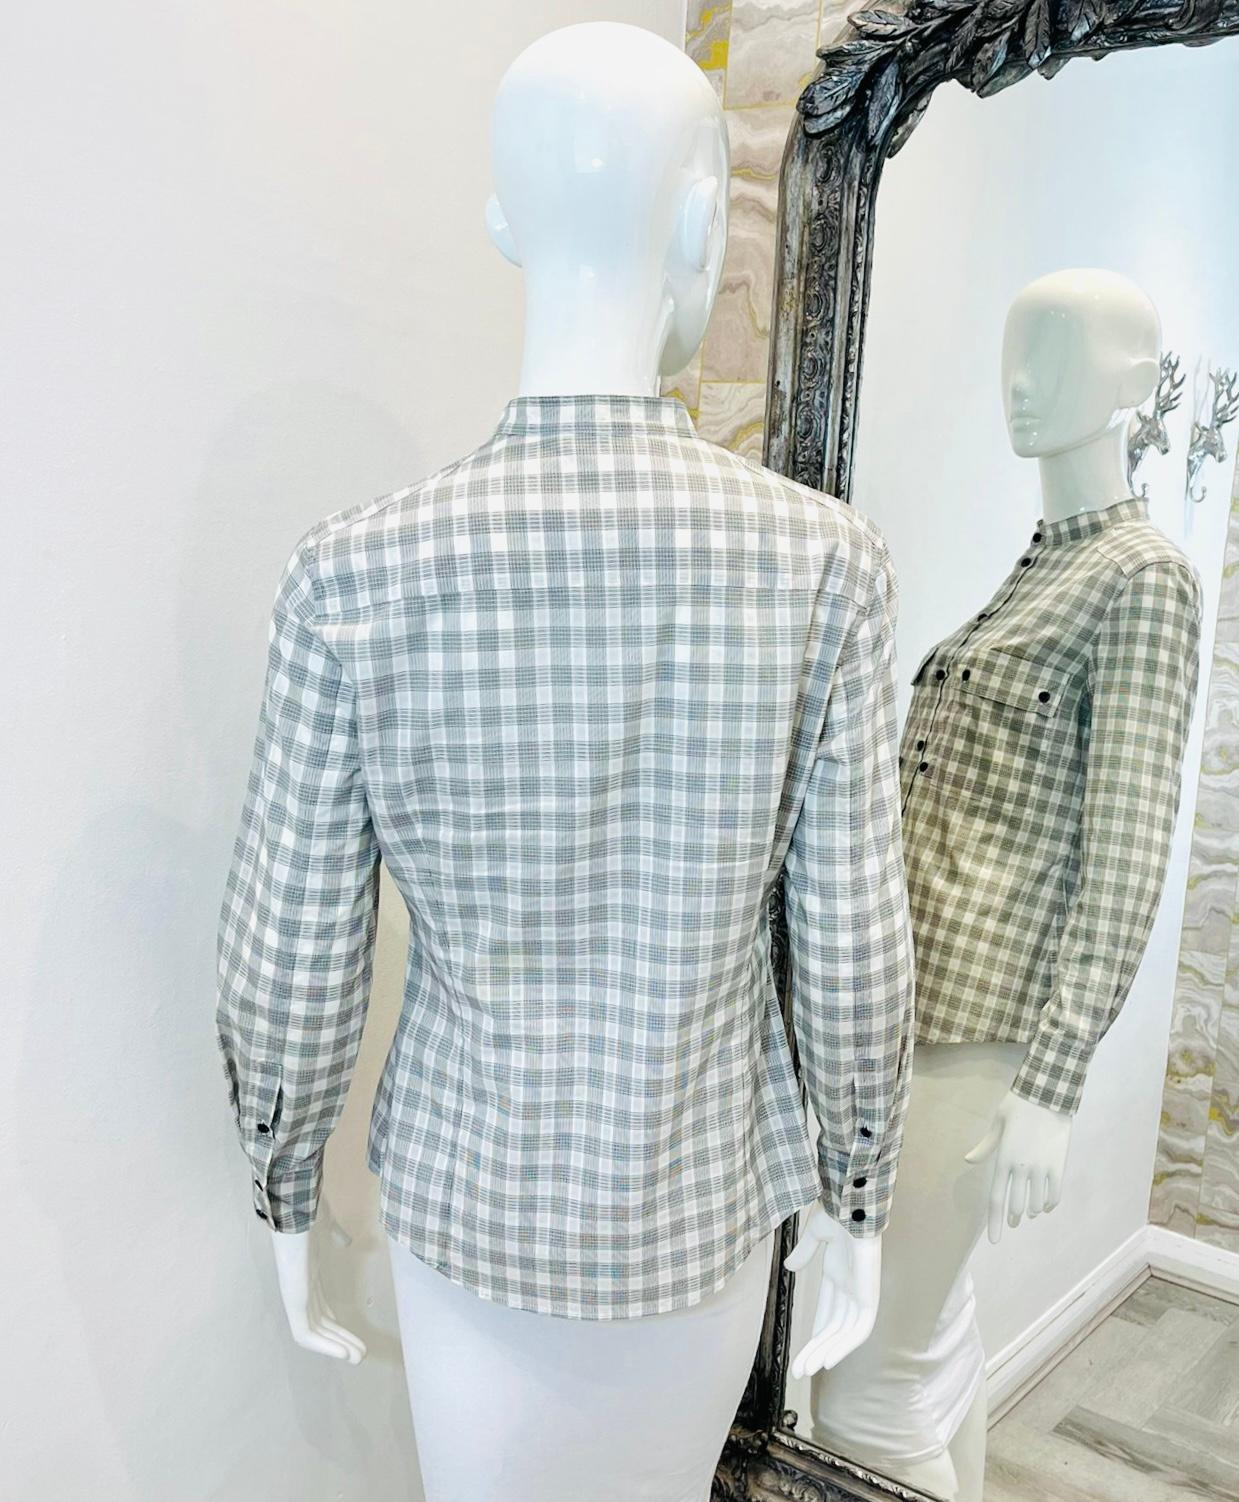 Saint Laurent Checked Cotton Shirt In Excellent Condition For Sale In London, GB